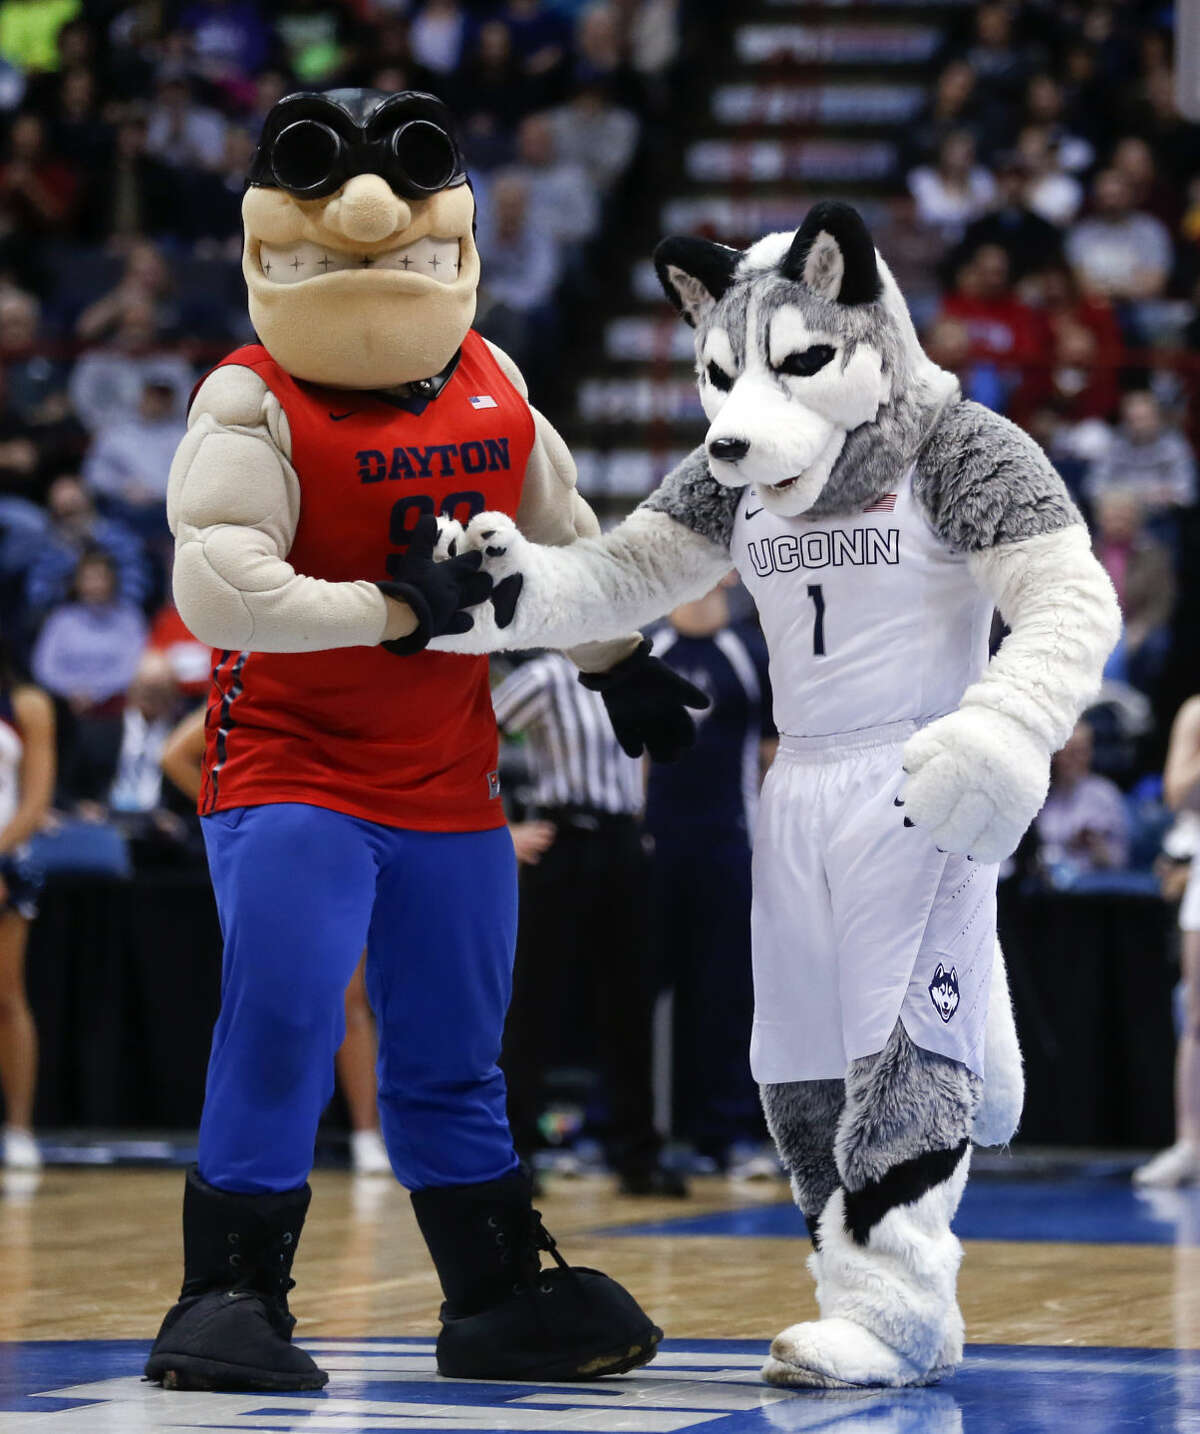 The Dayton and Connecticut mascots perform during the first half of a regional final game in the NCAA women's college basketball tournament on Monday, March 30, 2015, in Albany, N.Y. (AP Photo/Mike Groll)